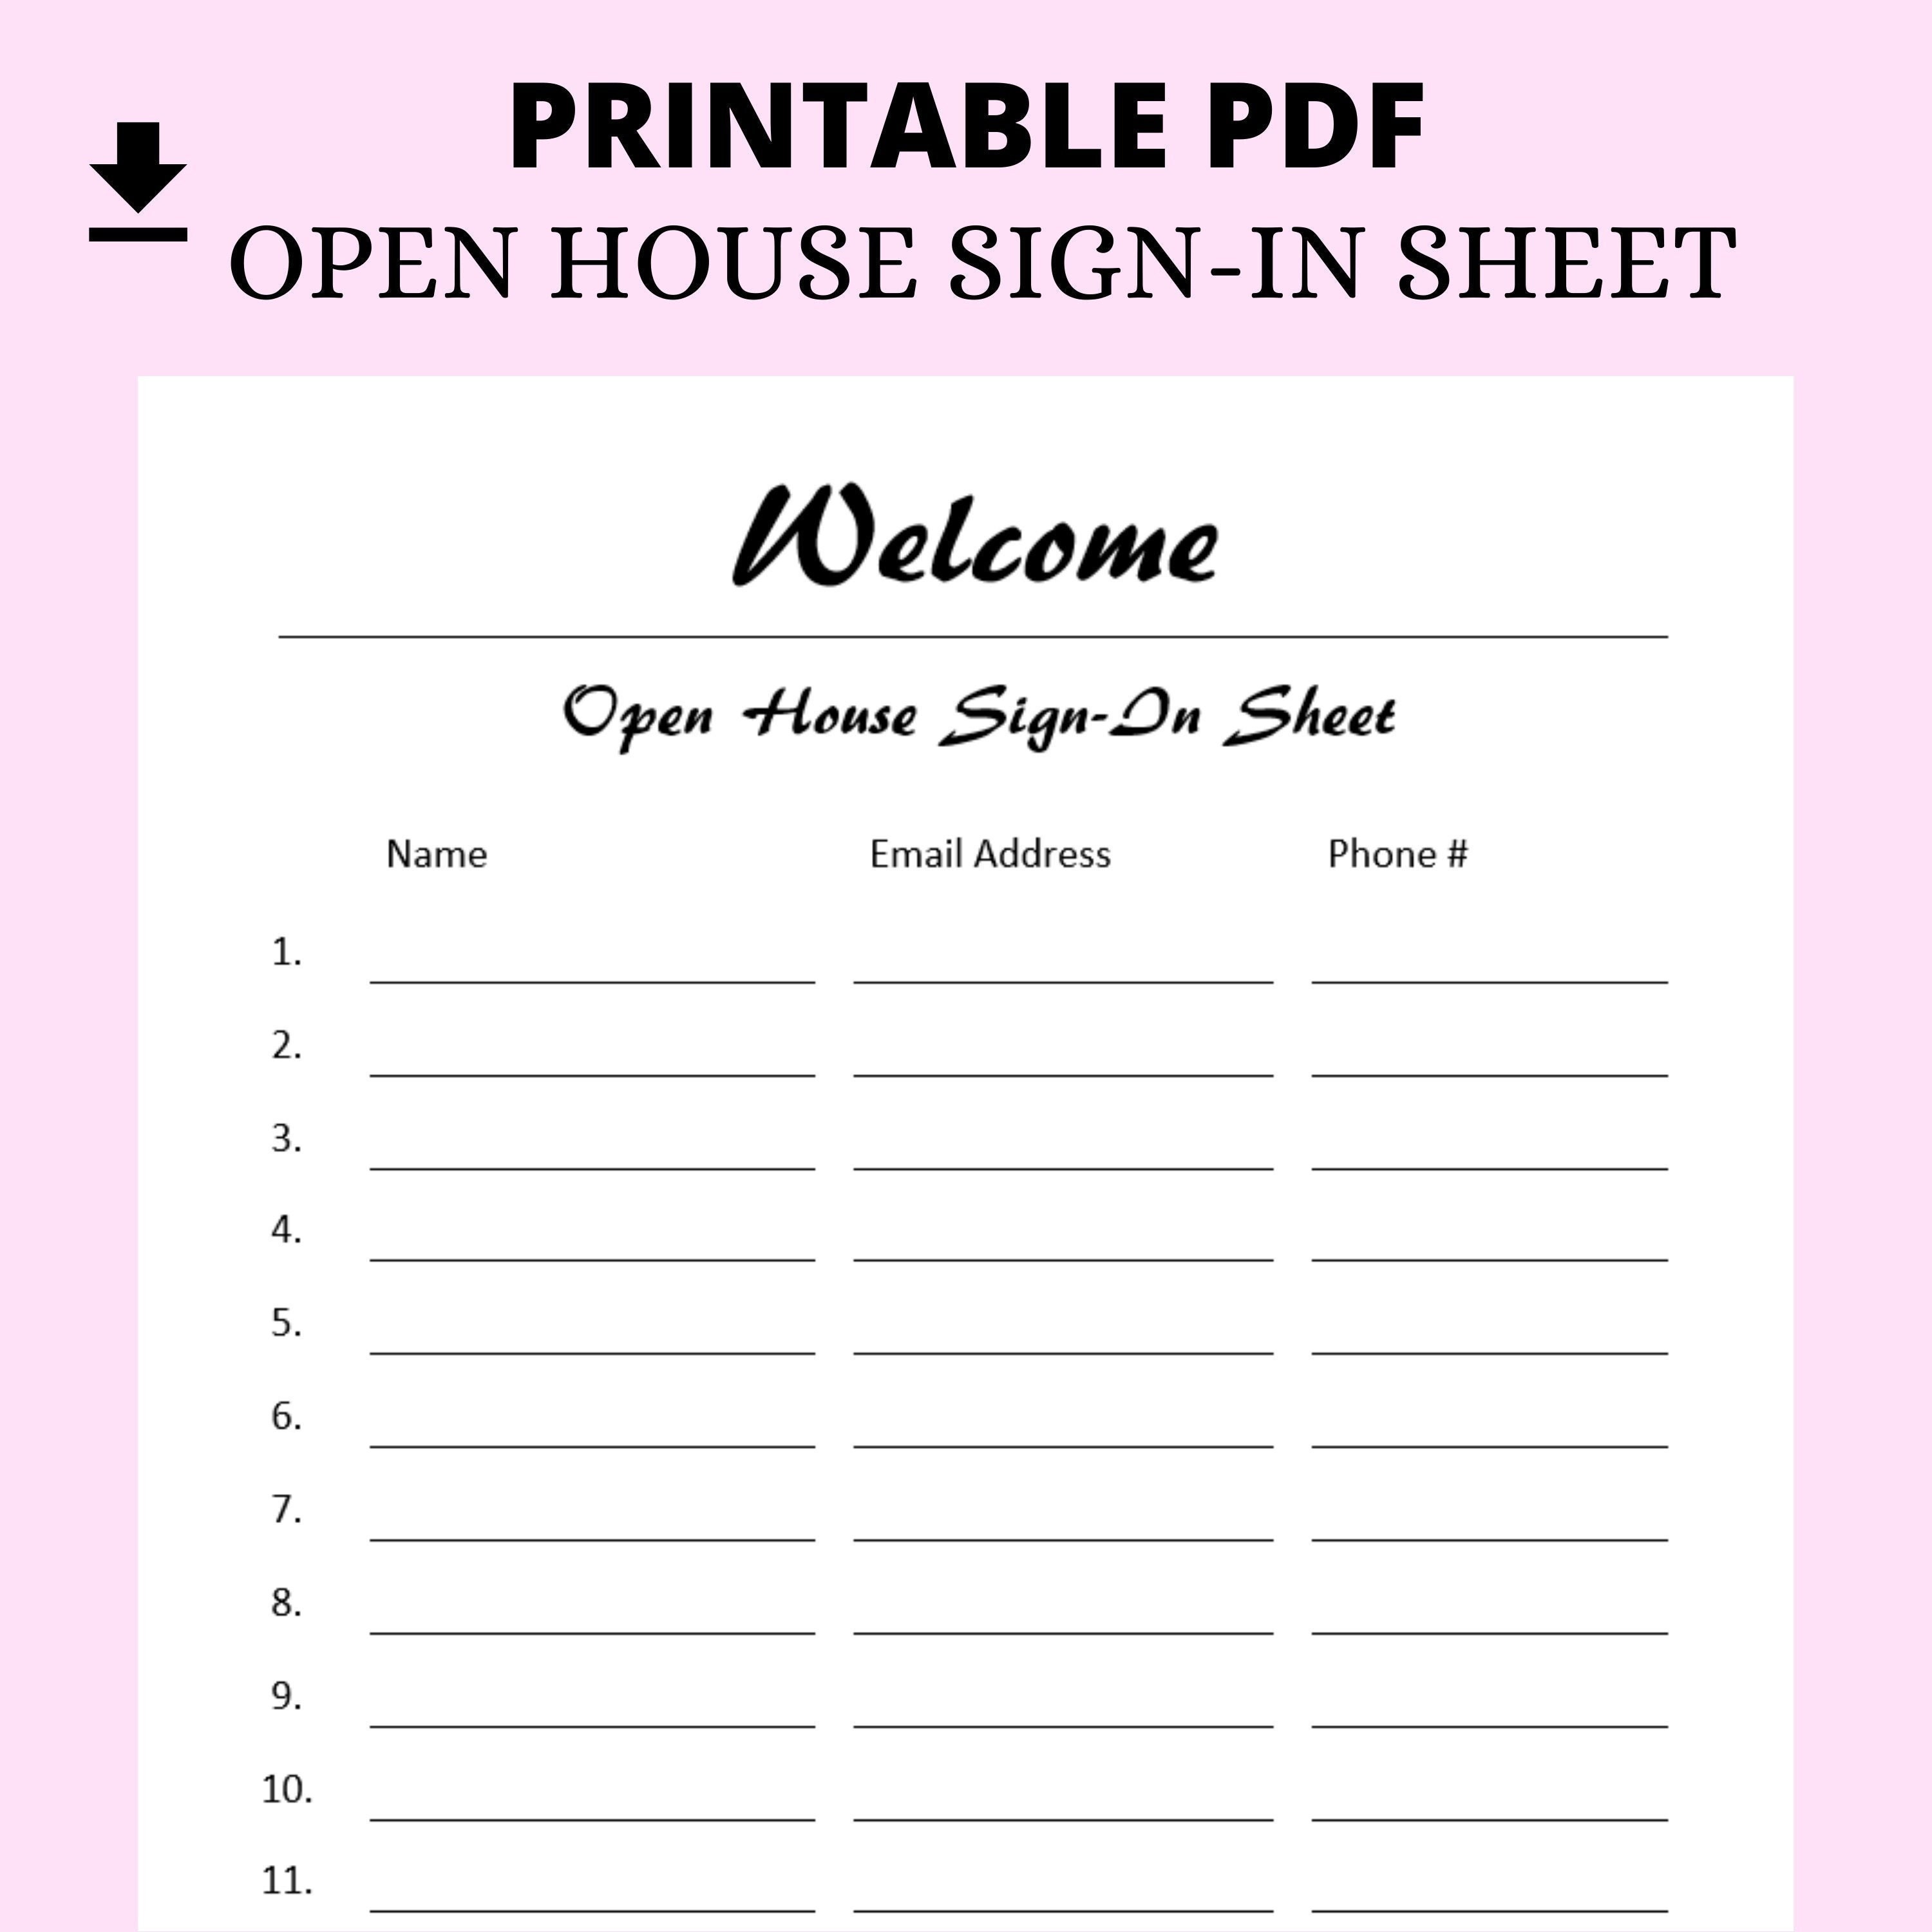 stationery-paper-feedback-forms-open-house-sign-in-sheet-pdf-realtor